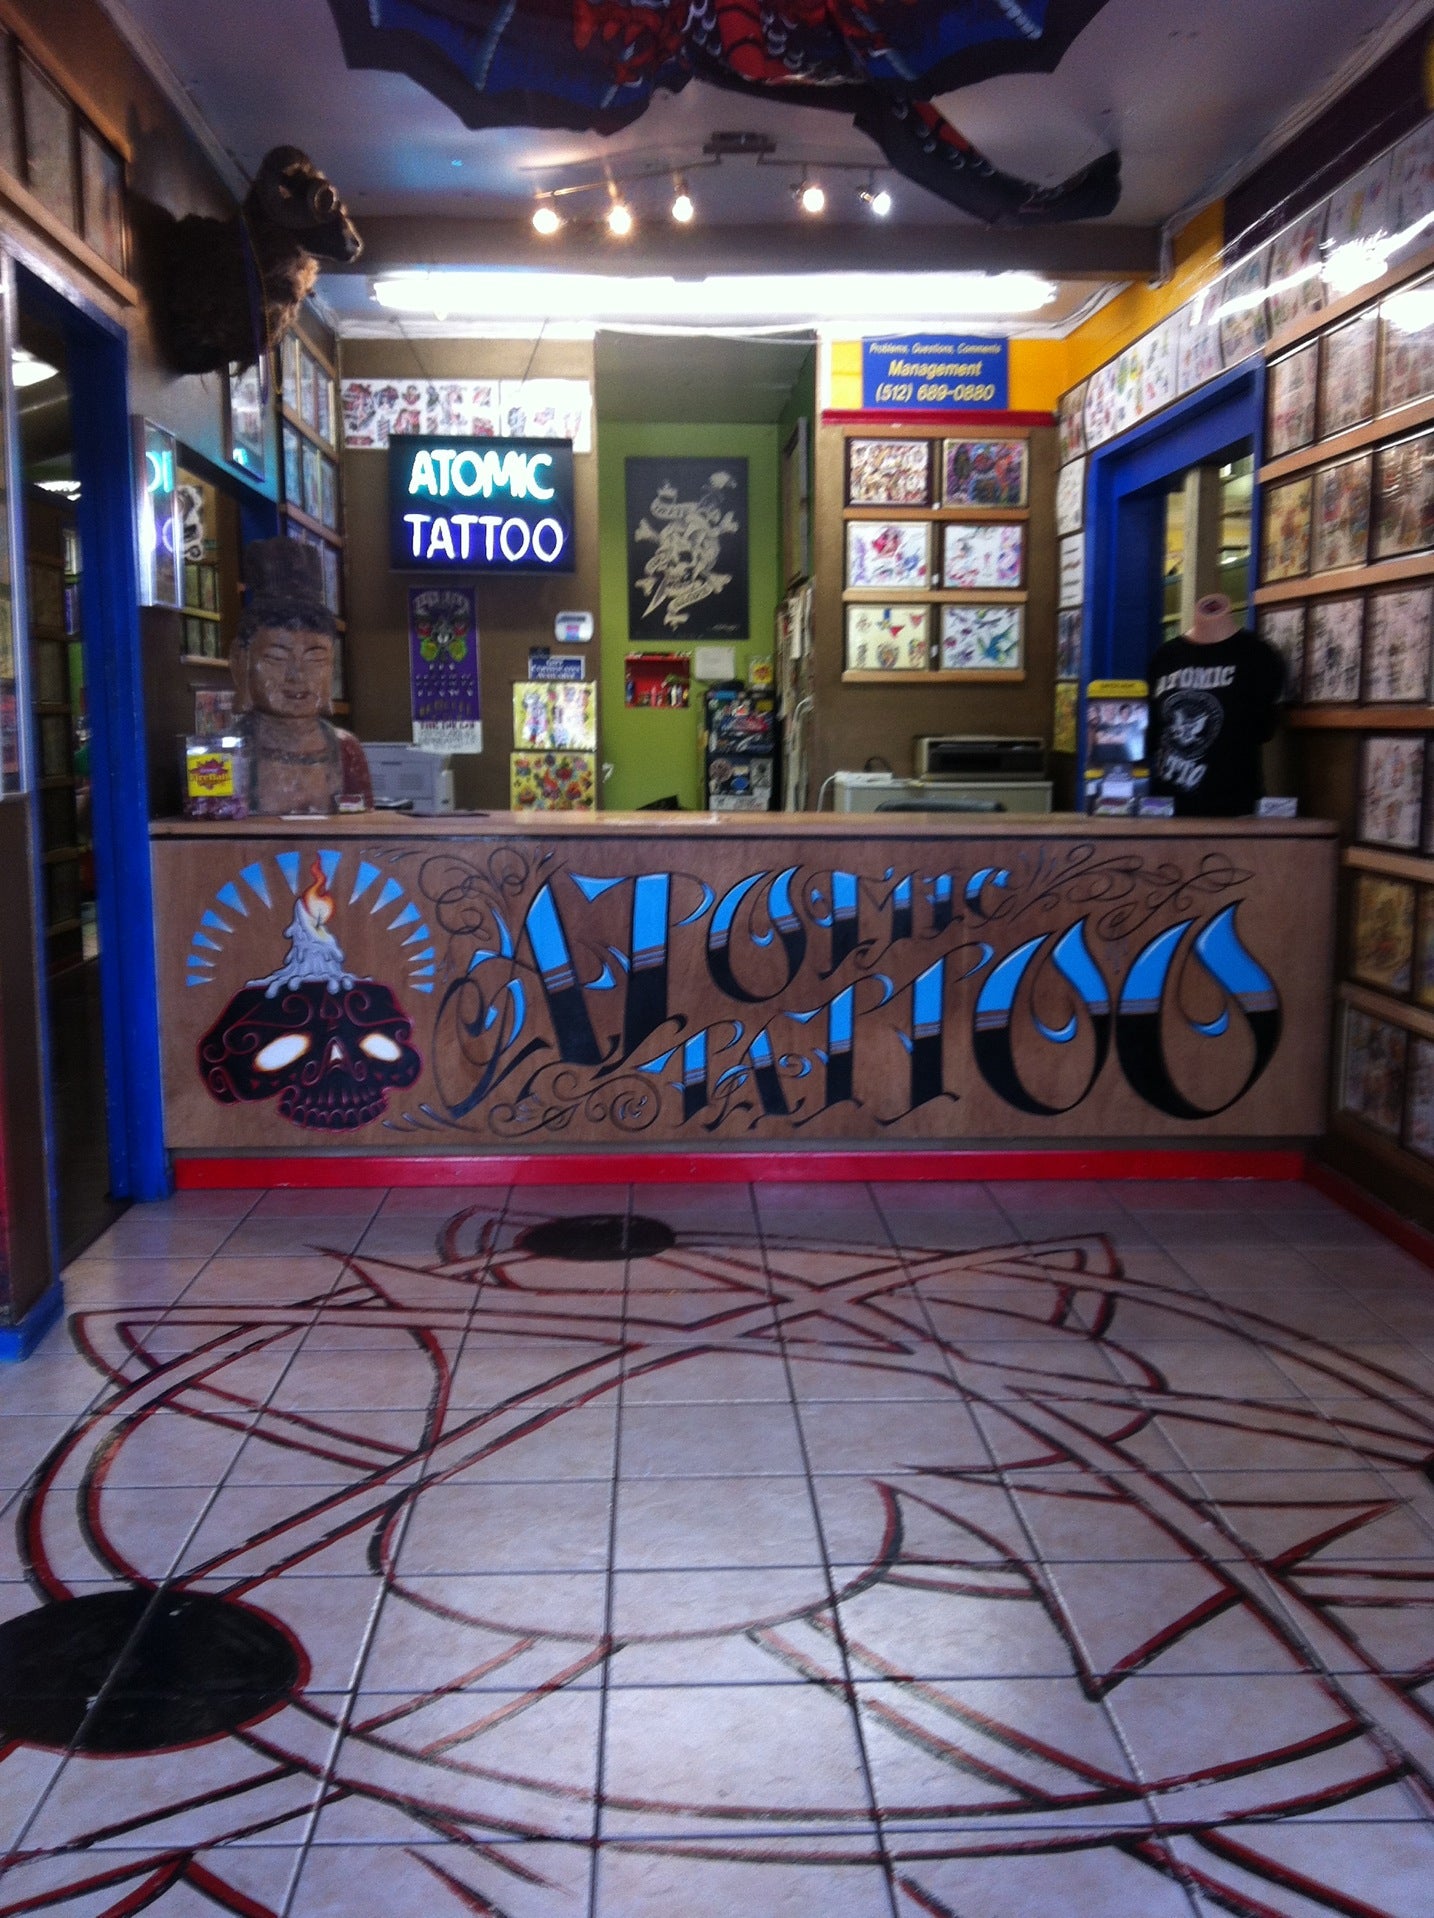 Tampa Bay Based Atomic Tattoos Opens First Mall Location Sets the Stage  for National Growth